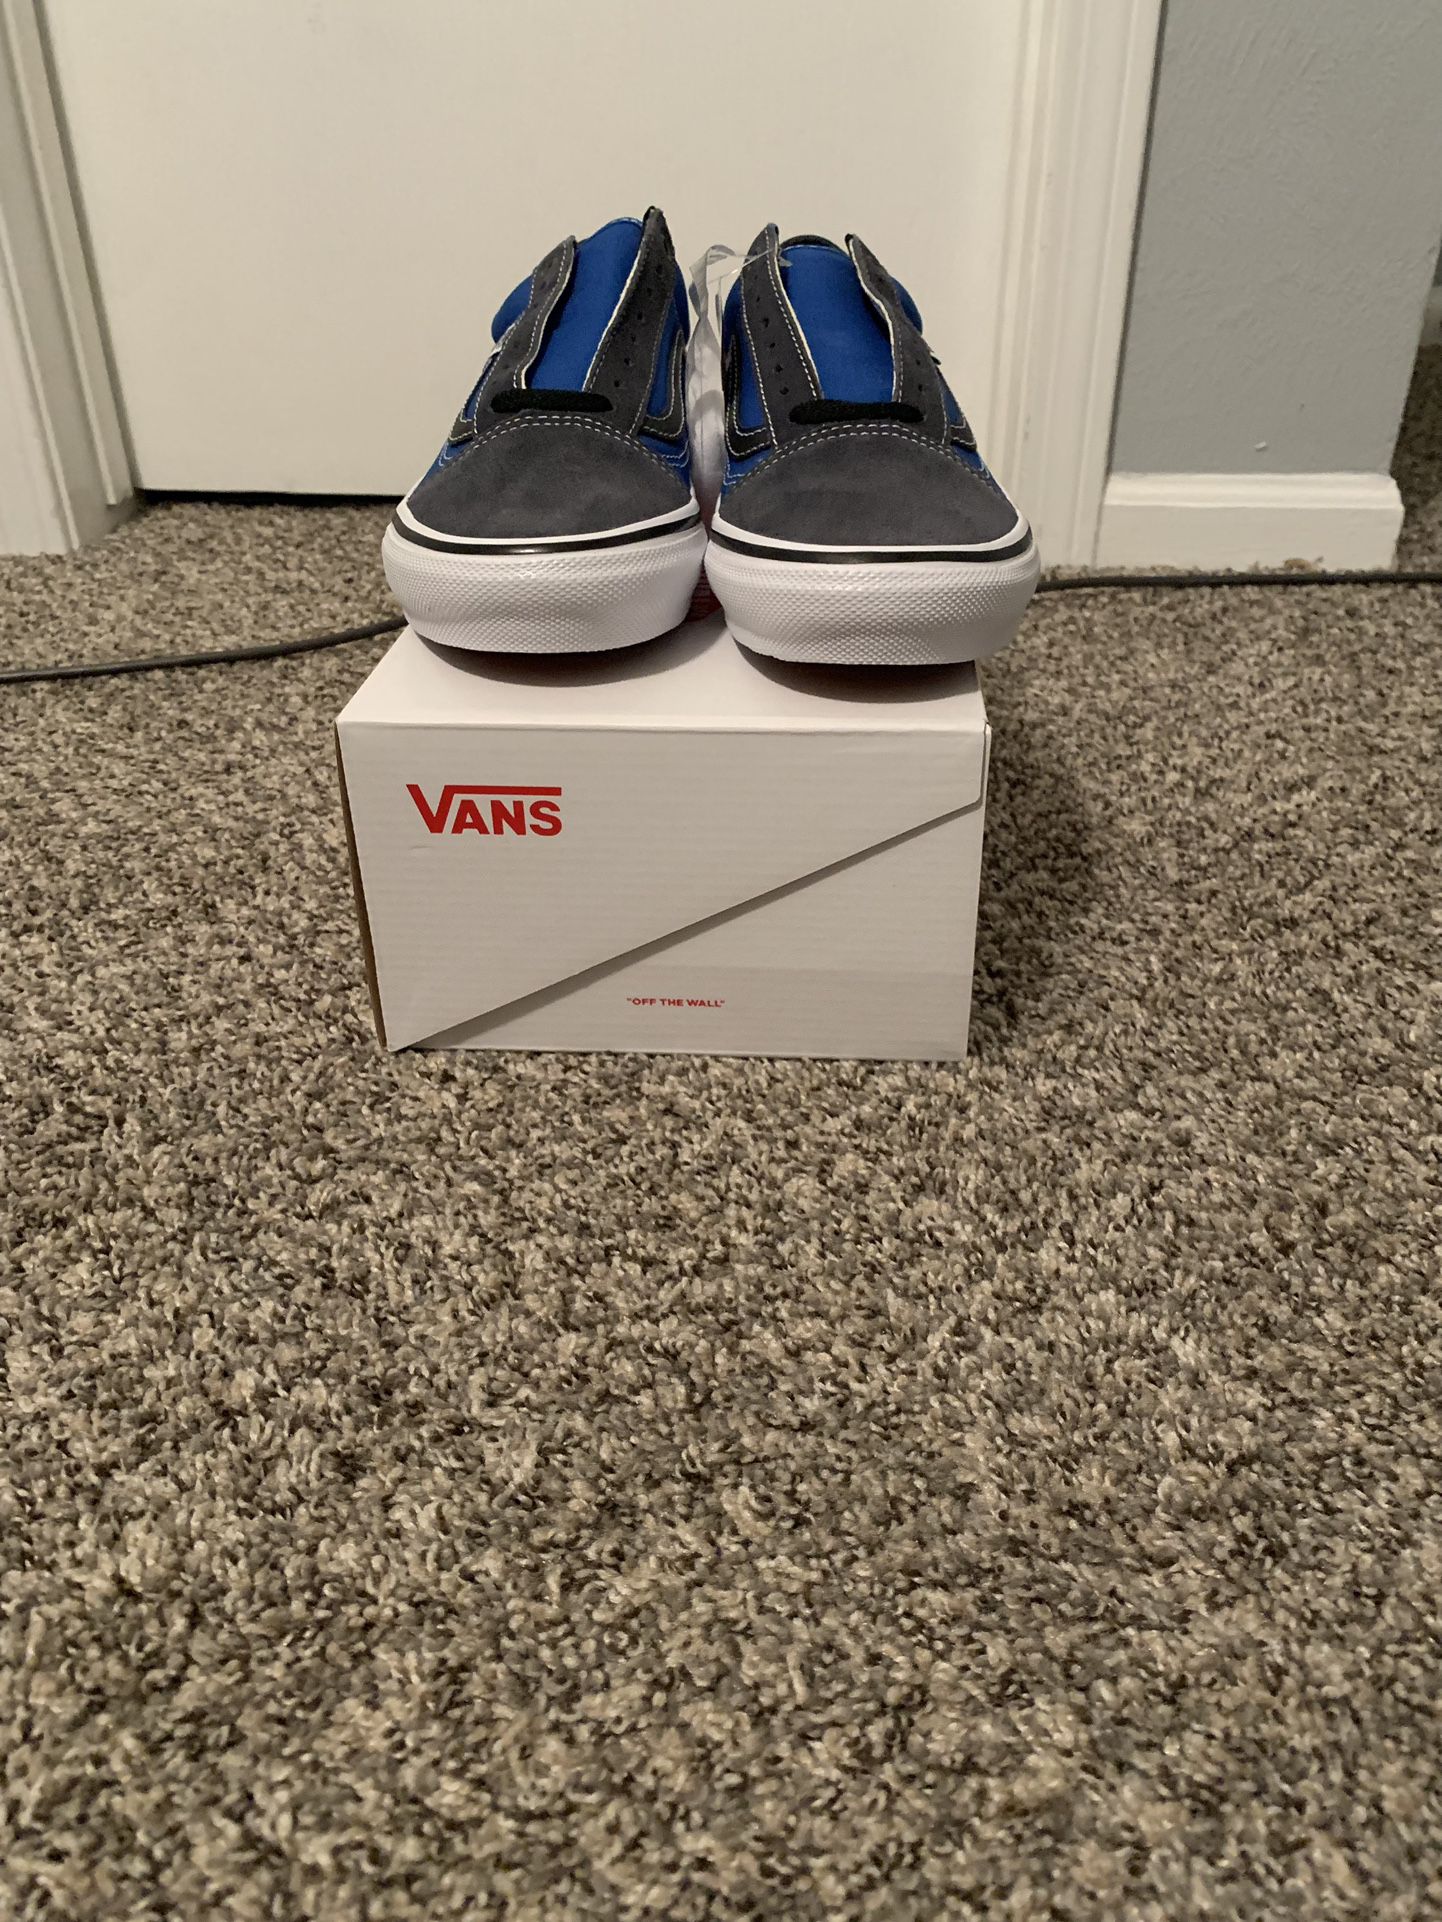 Supreme X Old Skool Vans Barbed Wire Size 9.5 With Box Brand New